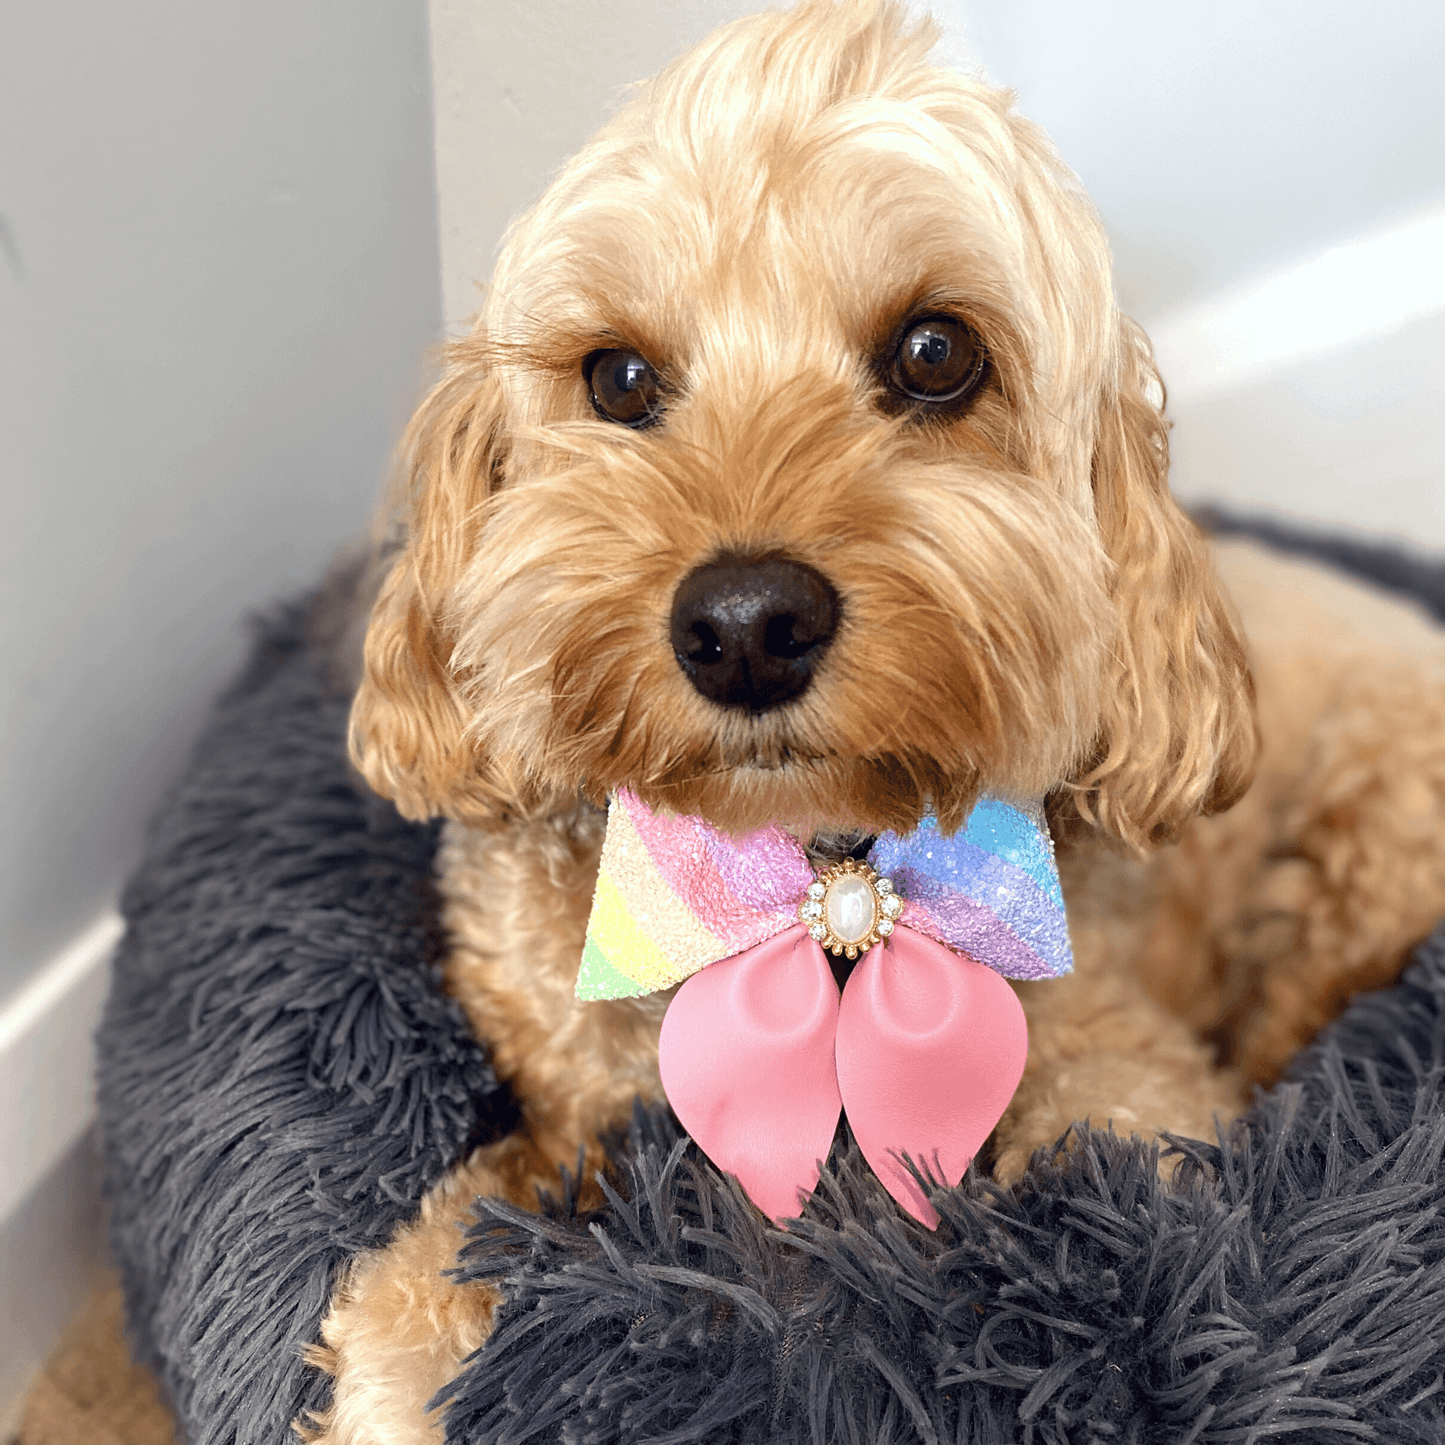 Dog sailor bow fashion accessory for your furbaby